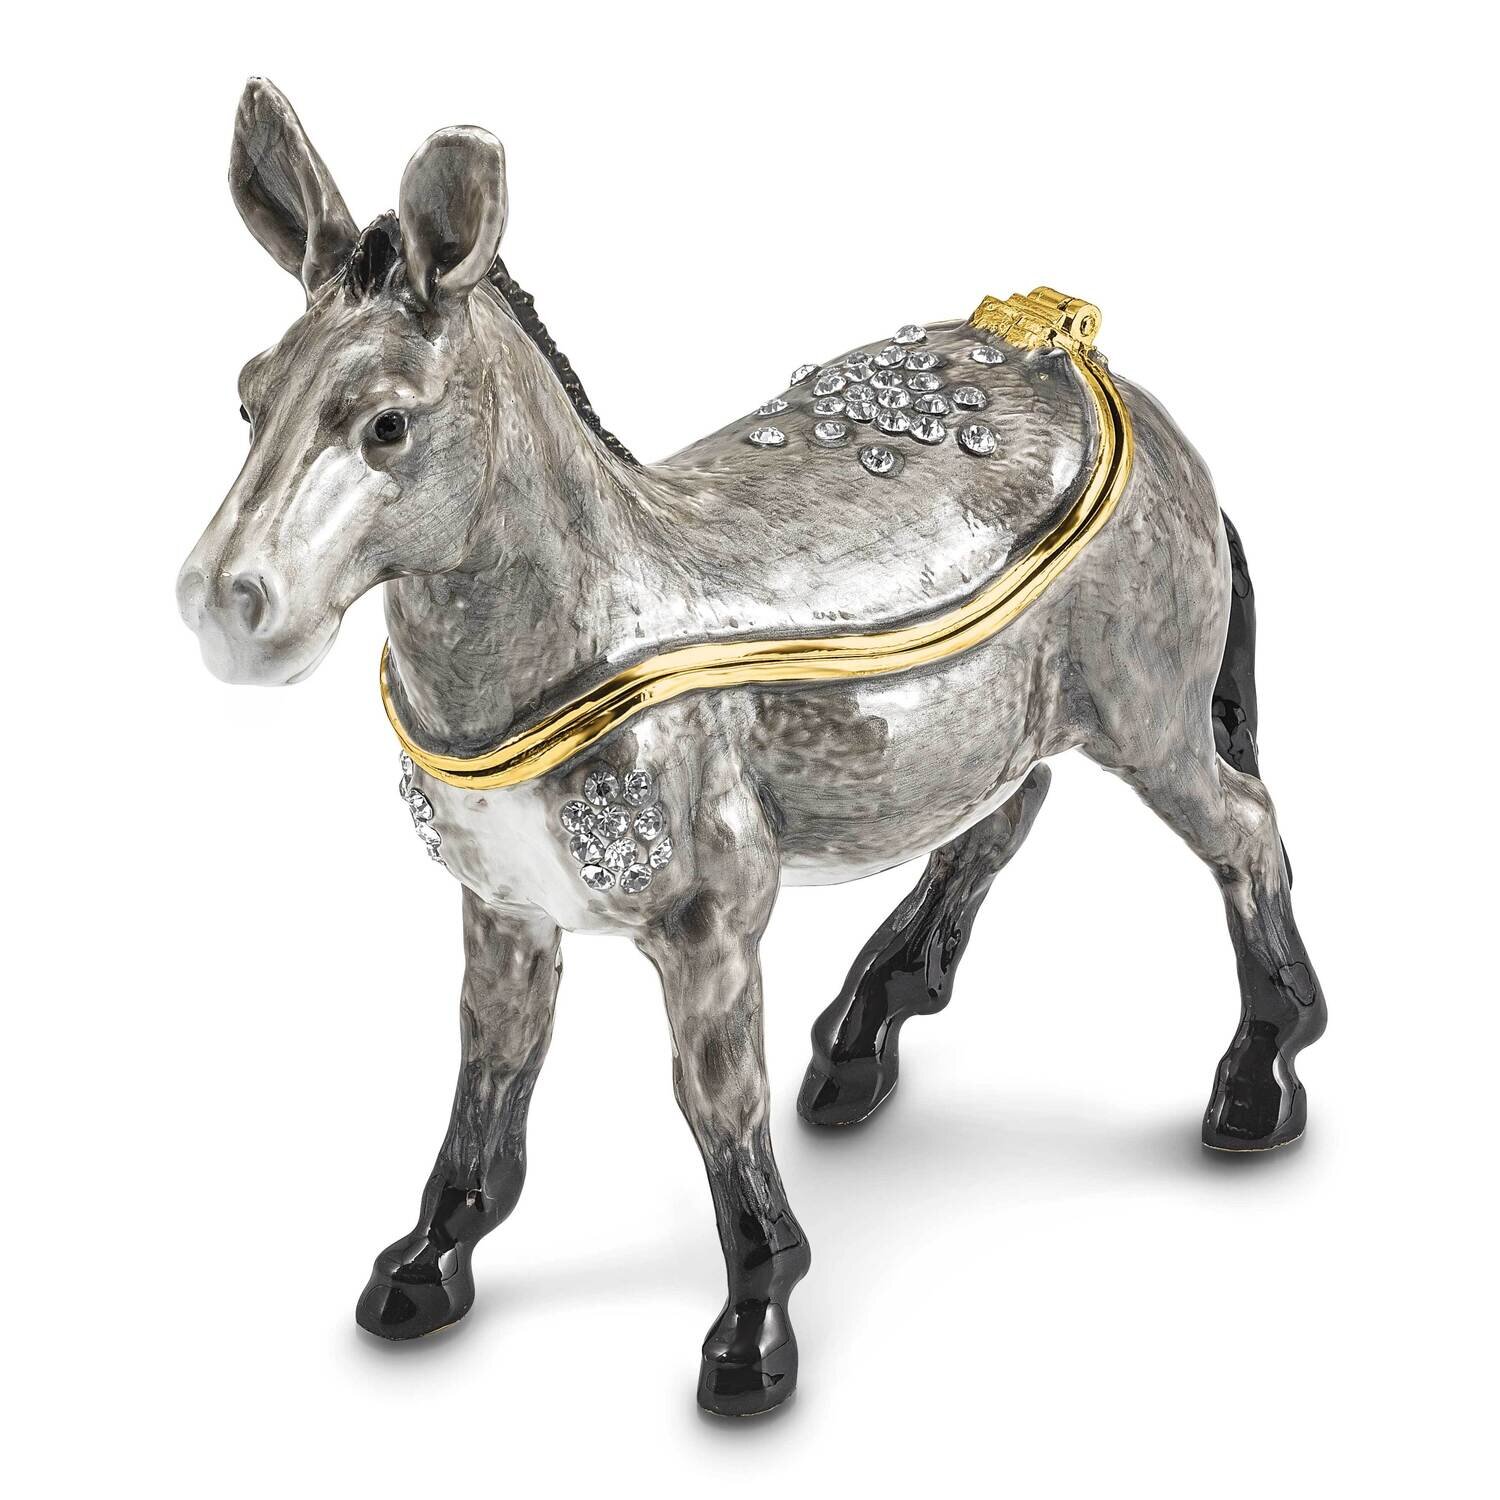 By Jere FEISTY Gray Donkey Trinket Box with Matching 18 Inch Necklace Pewter Bejeweled Crystals Gold-tone Enameled BJ4145